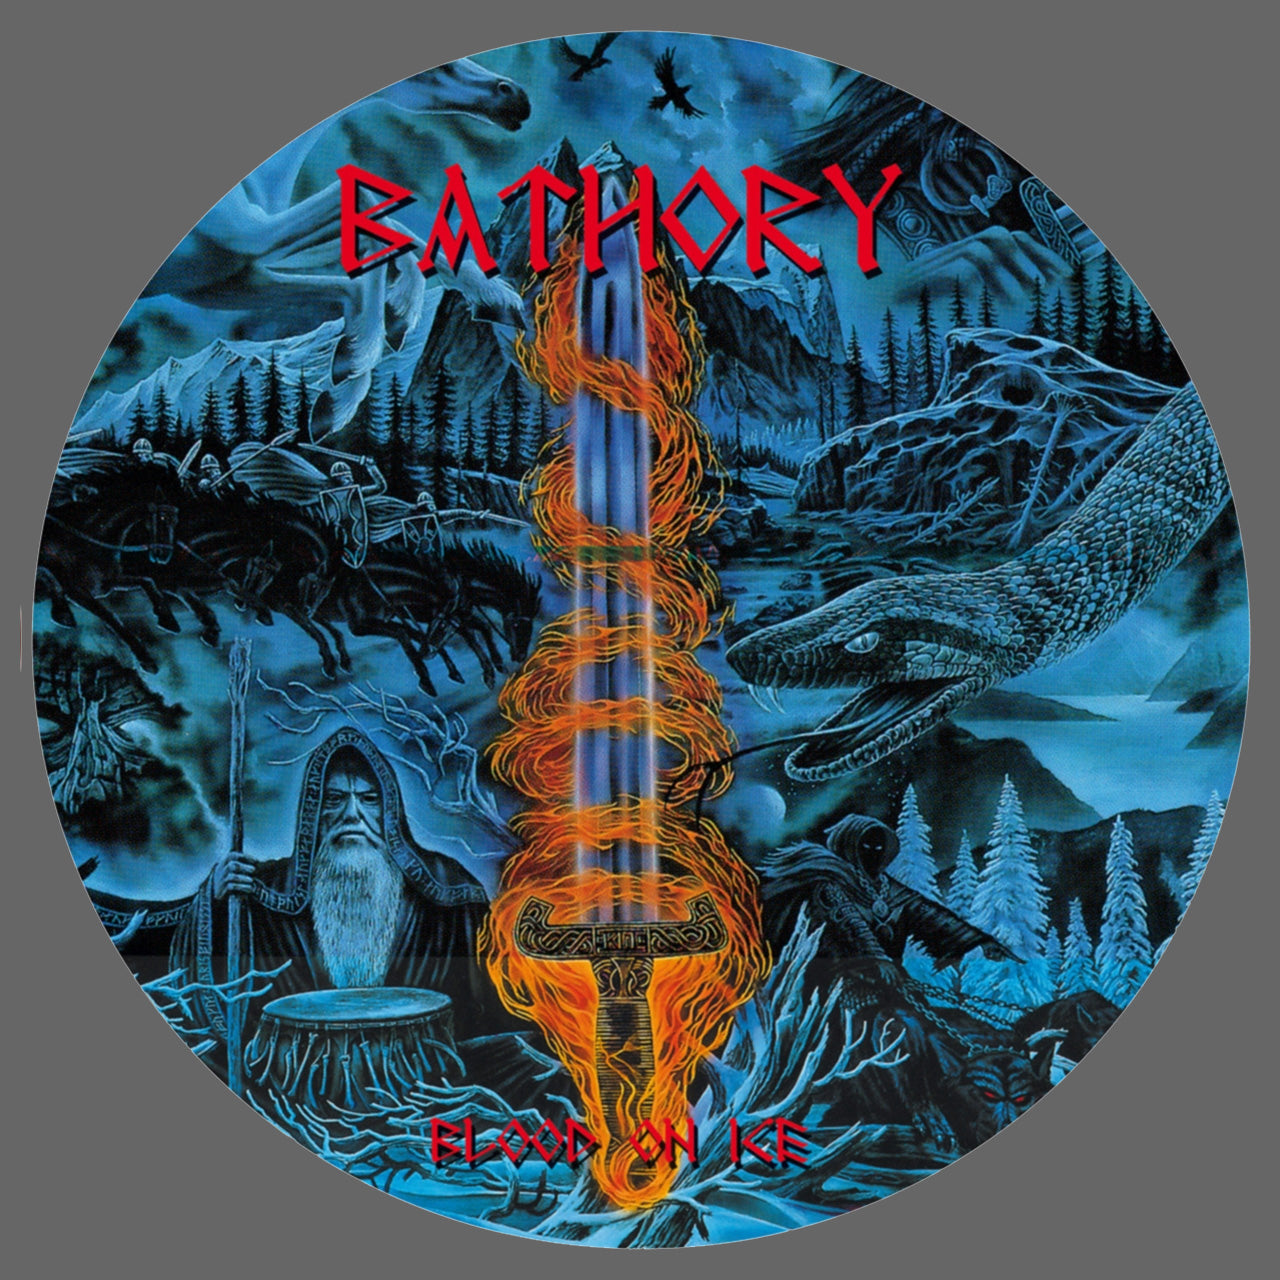 Bathory - Blood on Ice (2022 Reissue) (Picture Disc LP)